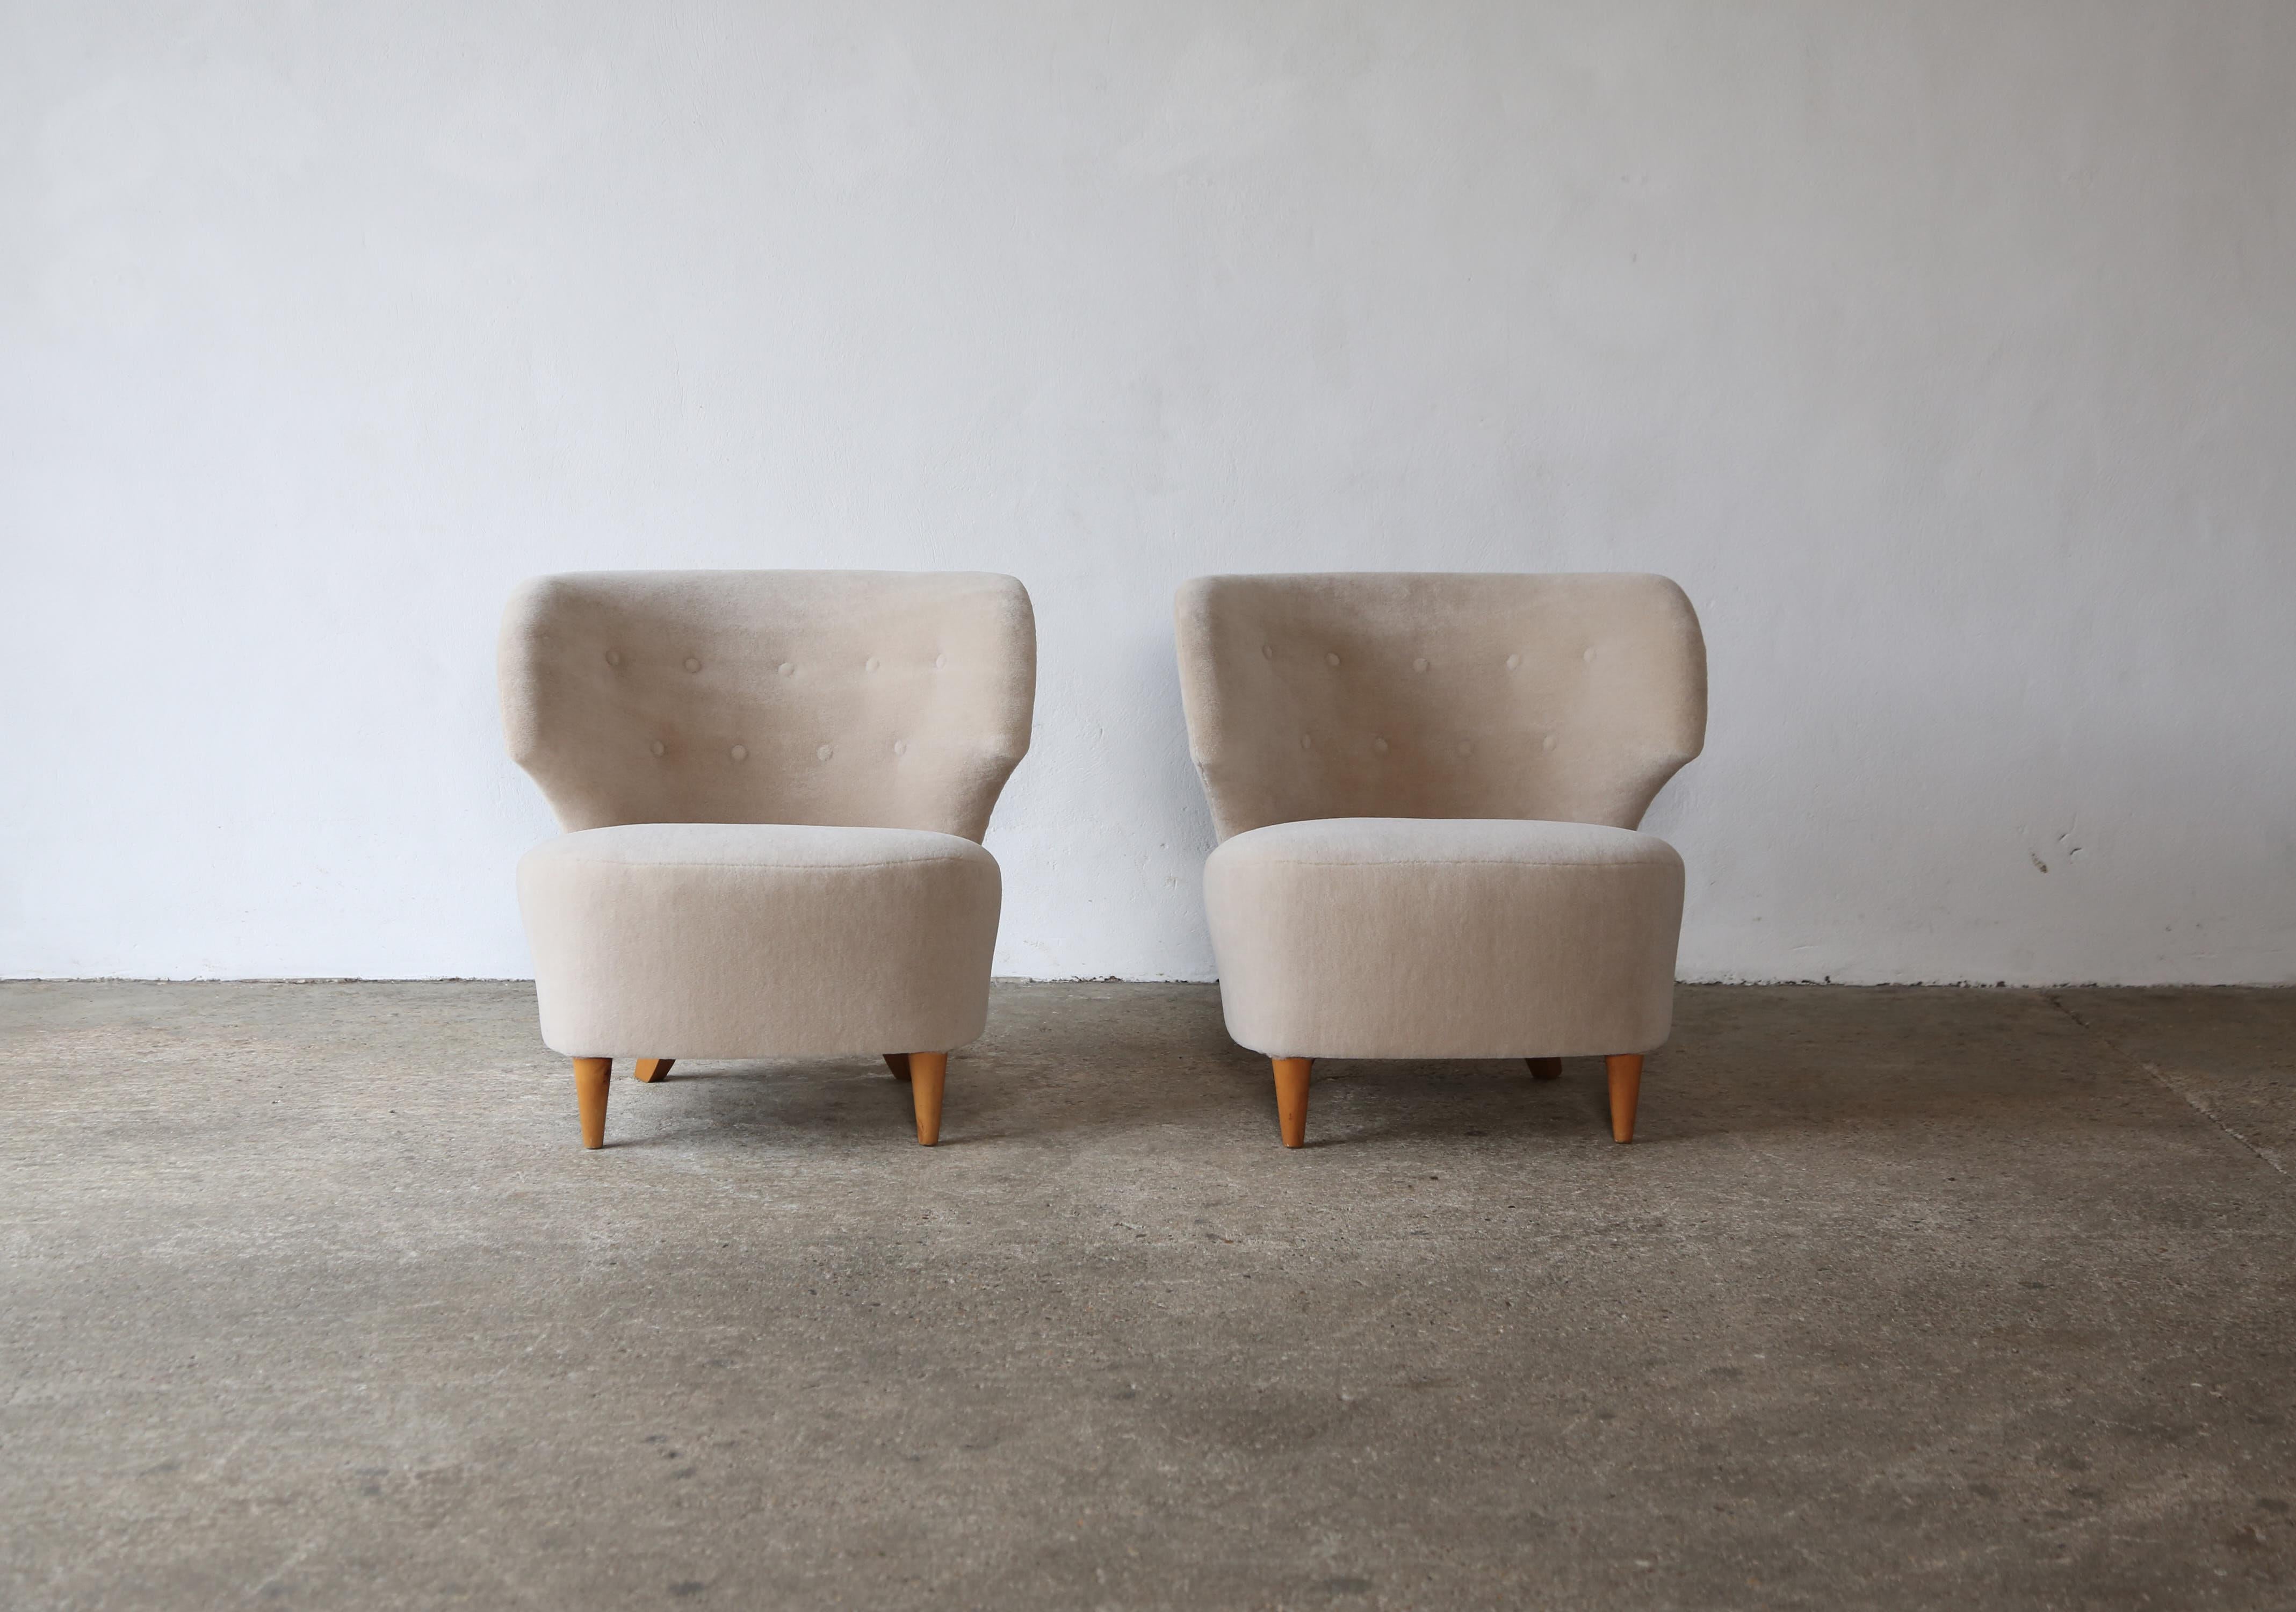 Pair of Carl-Johan Boman Chairs, Finland, 1940s, Newly Upholstered in Alpaca 5